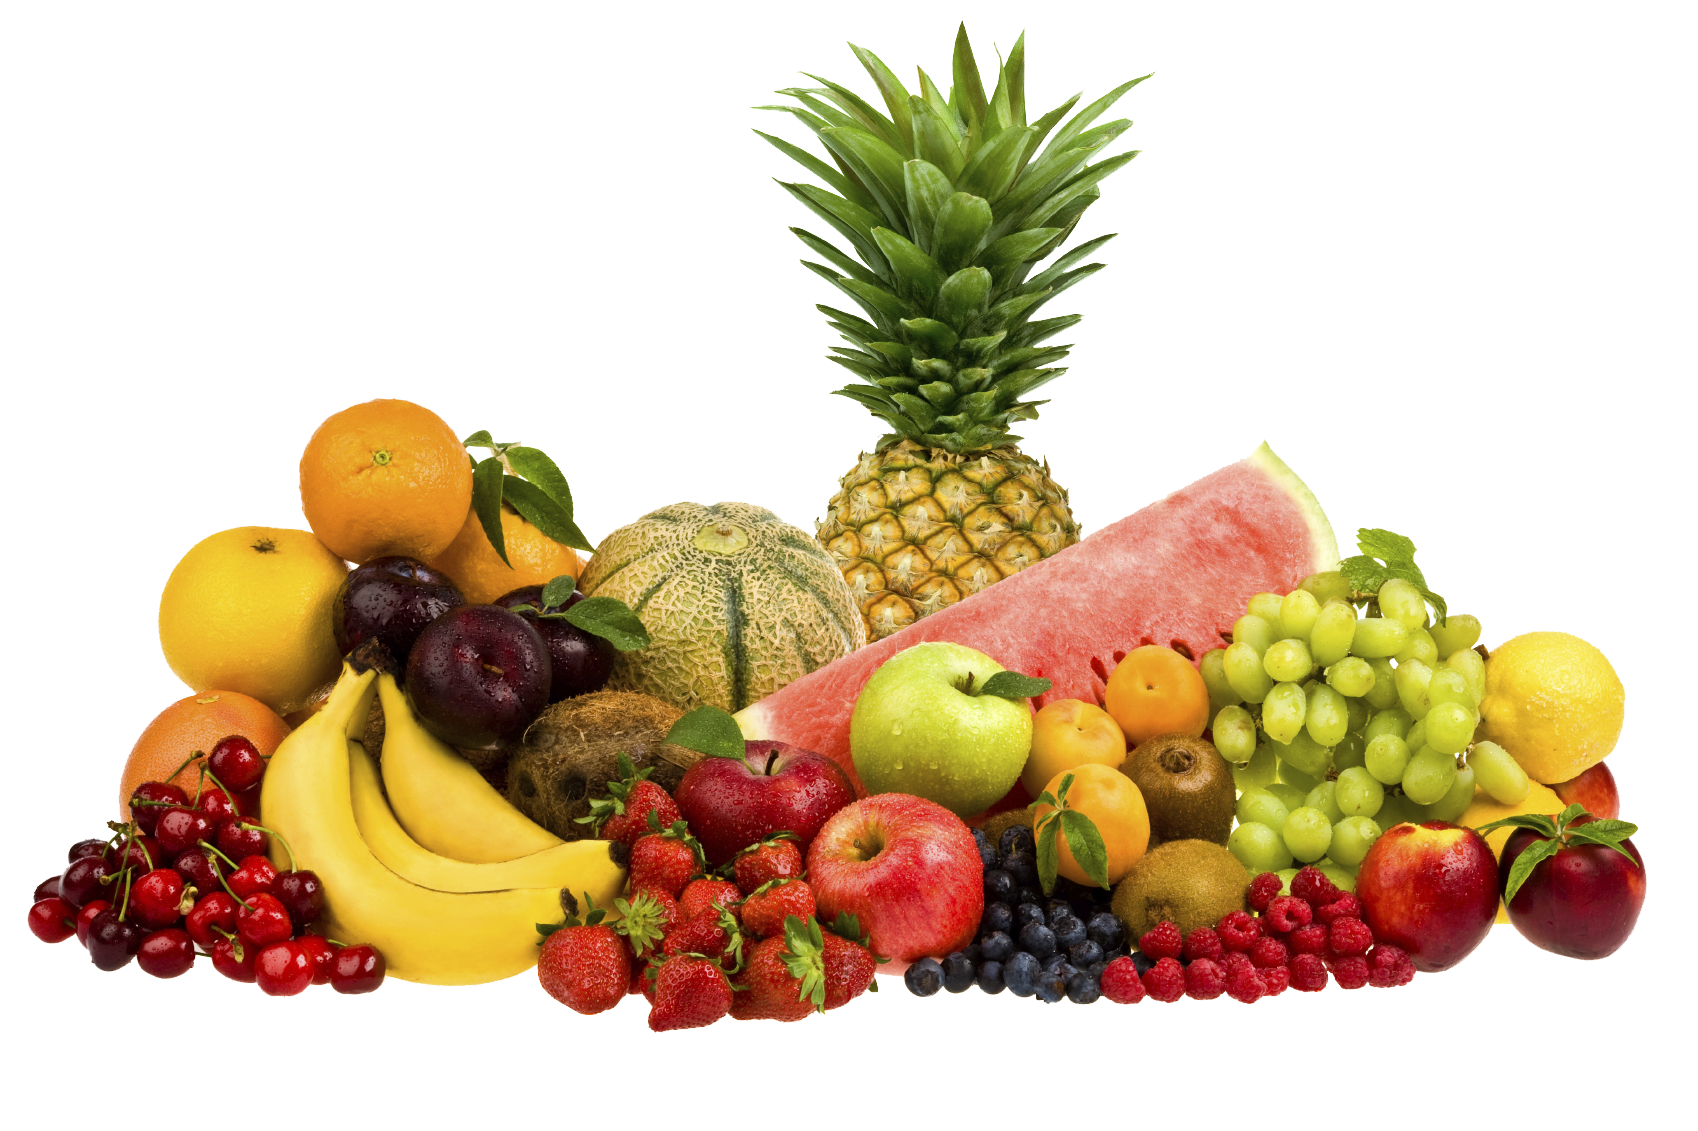 Fruits And Vegetables PNG HD Transparent Fruits And Vegetables HD.